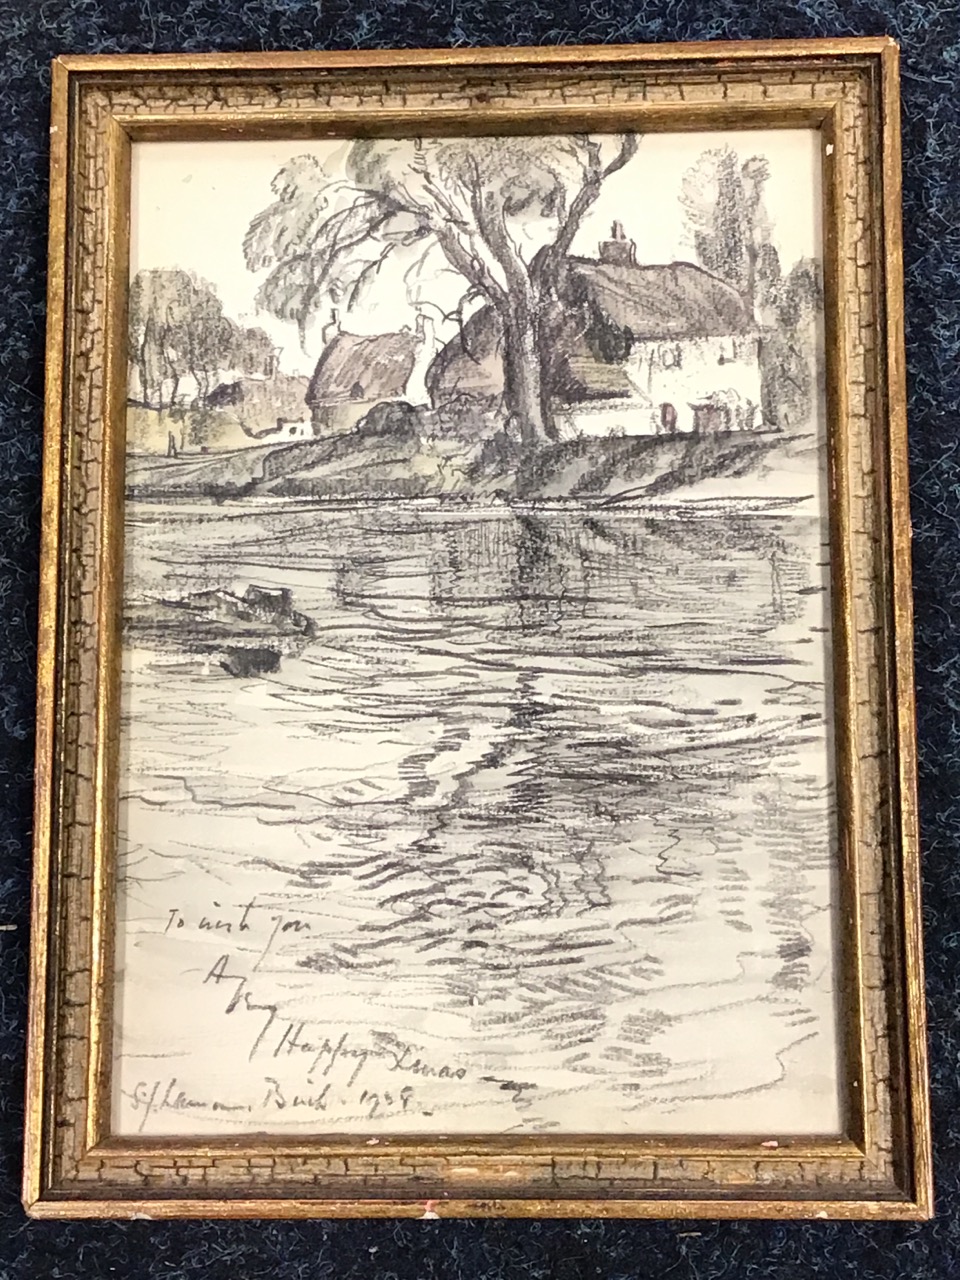 Samuel Lamorna Birch, pencil, river landscape with cottages & trees, a Christmas card sketch